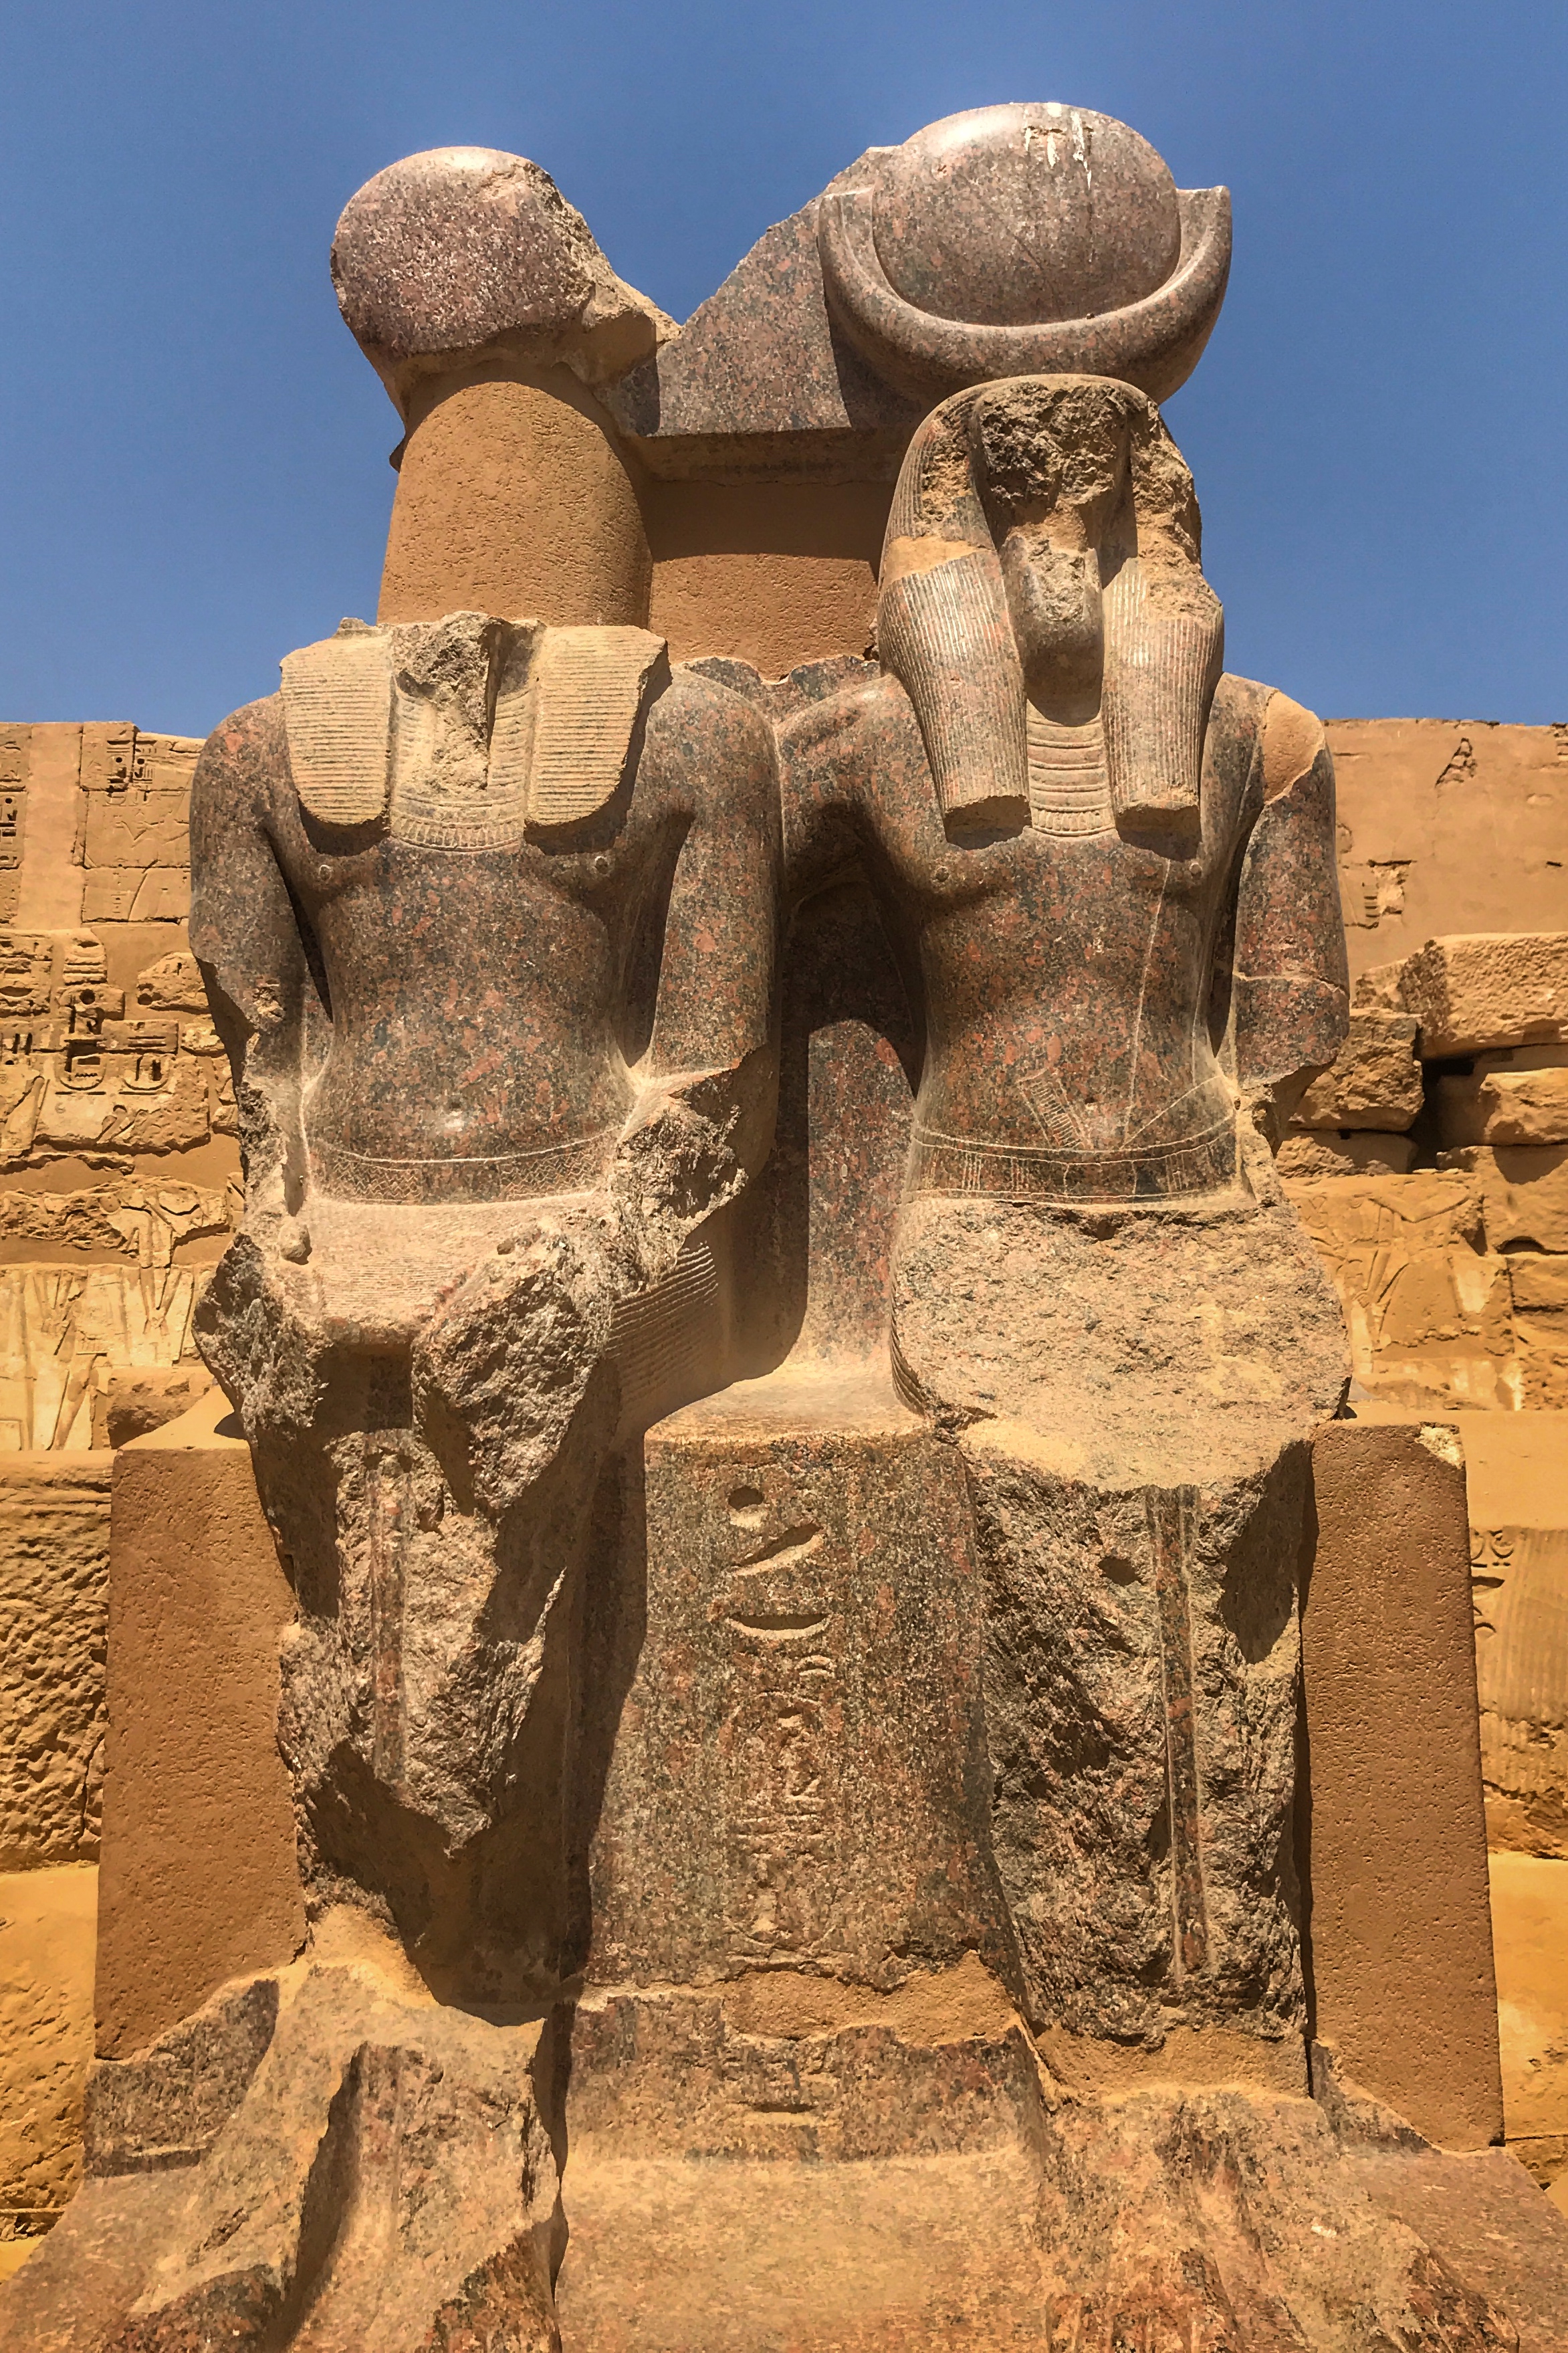 There are four rose granite statues at the very back of the complex. They depict Ramesses III with Maat, the goddess of truth and justice, and Thoth, the god of wisdom